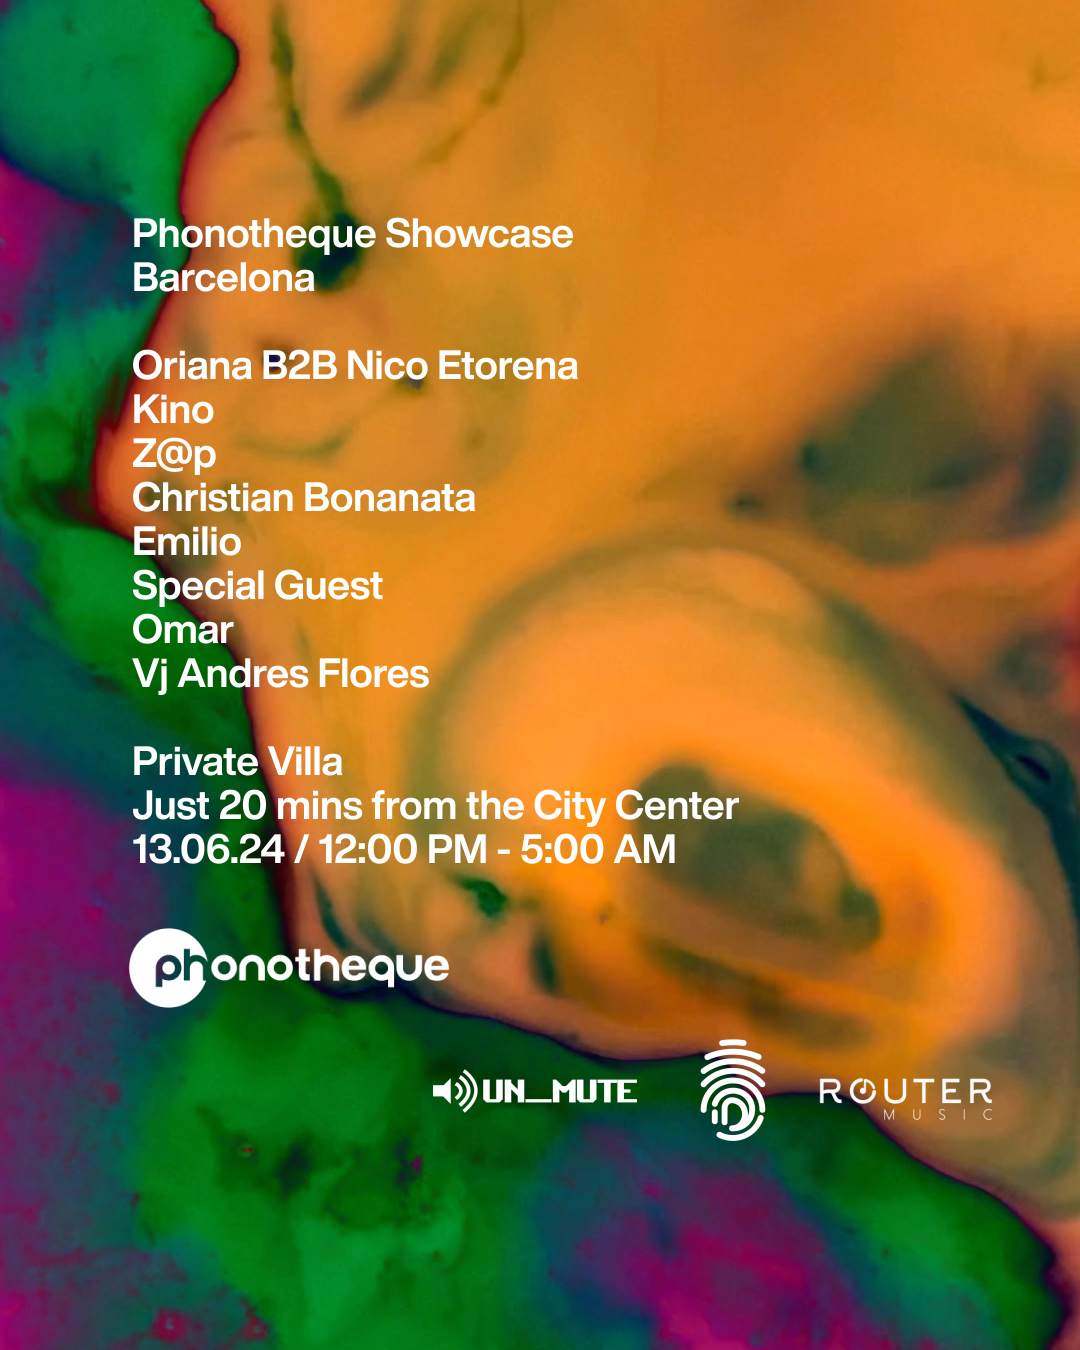 Phonotheque BCN Showcase OFF WEEK  - フライヤー表